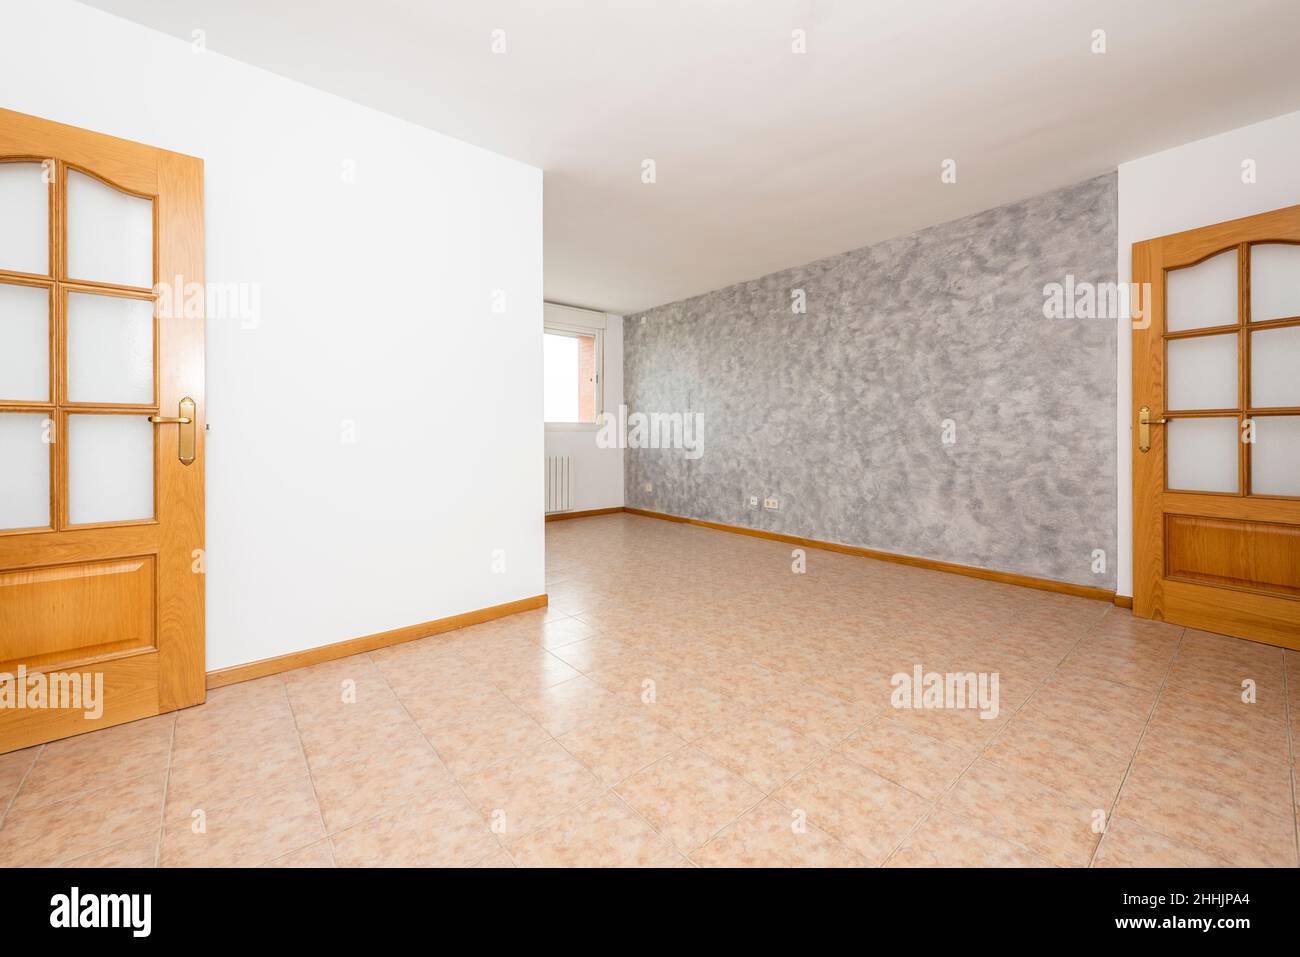 Empty living room with two-tone painted walls, stoneware floors, and oak woodwork Stock Photo